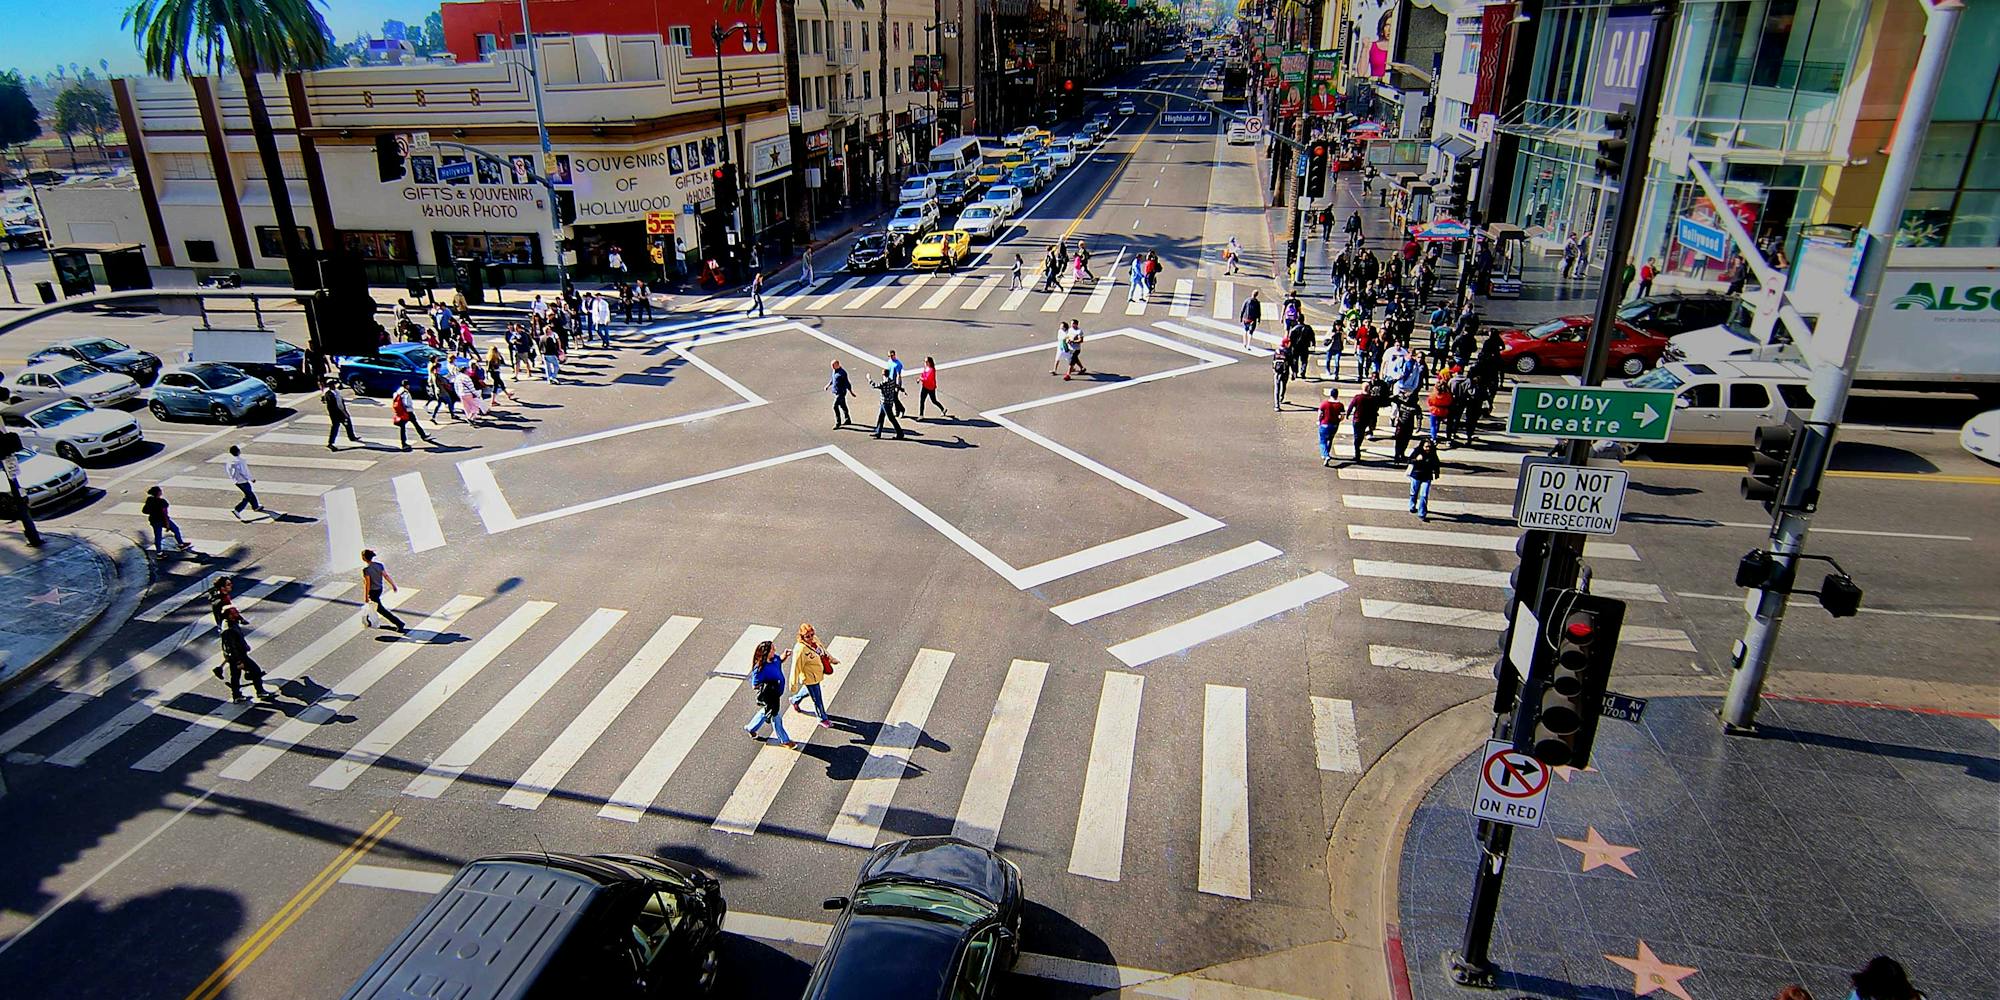 A Fourway intersection and crosswalk